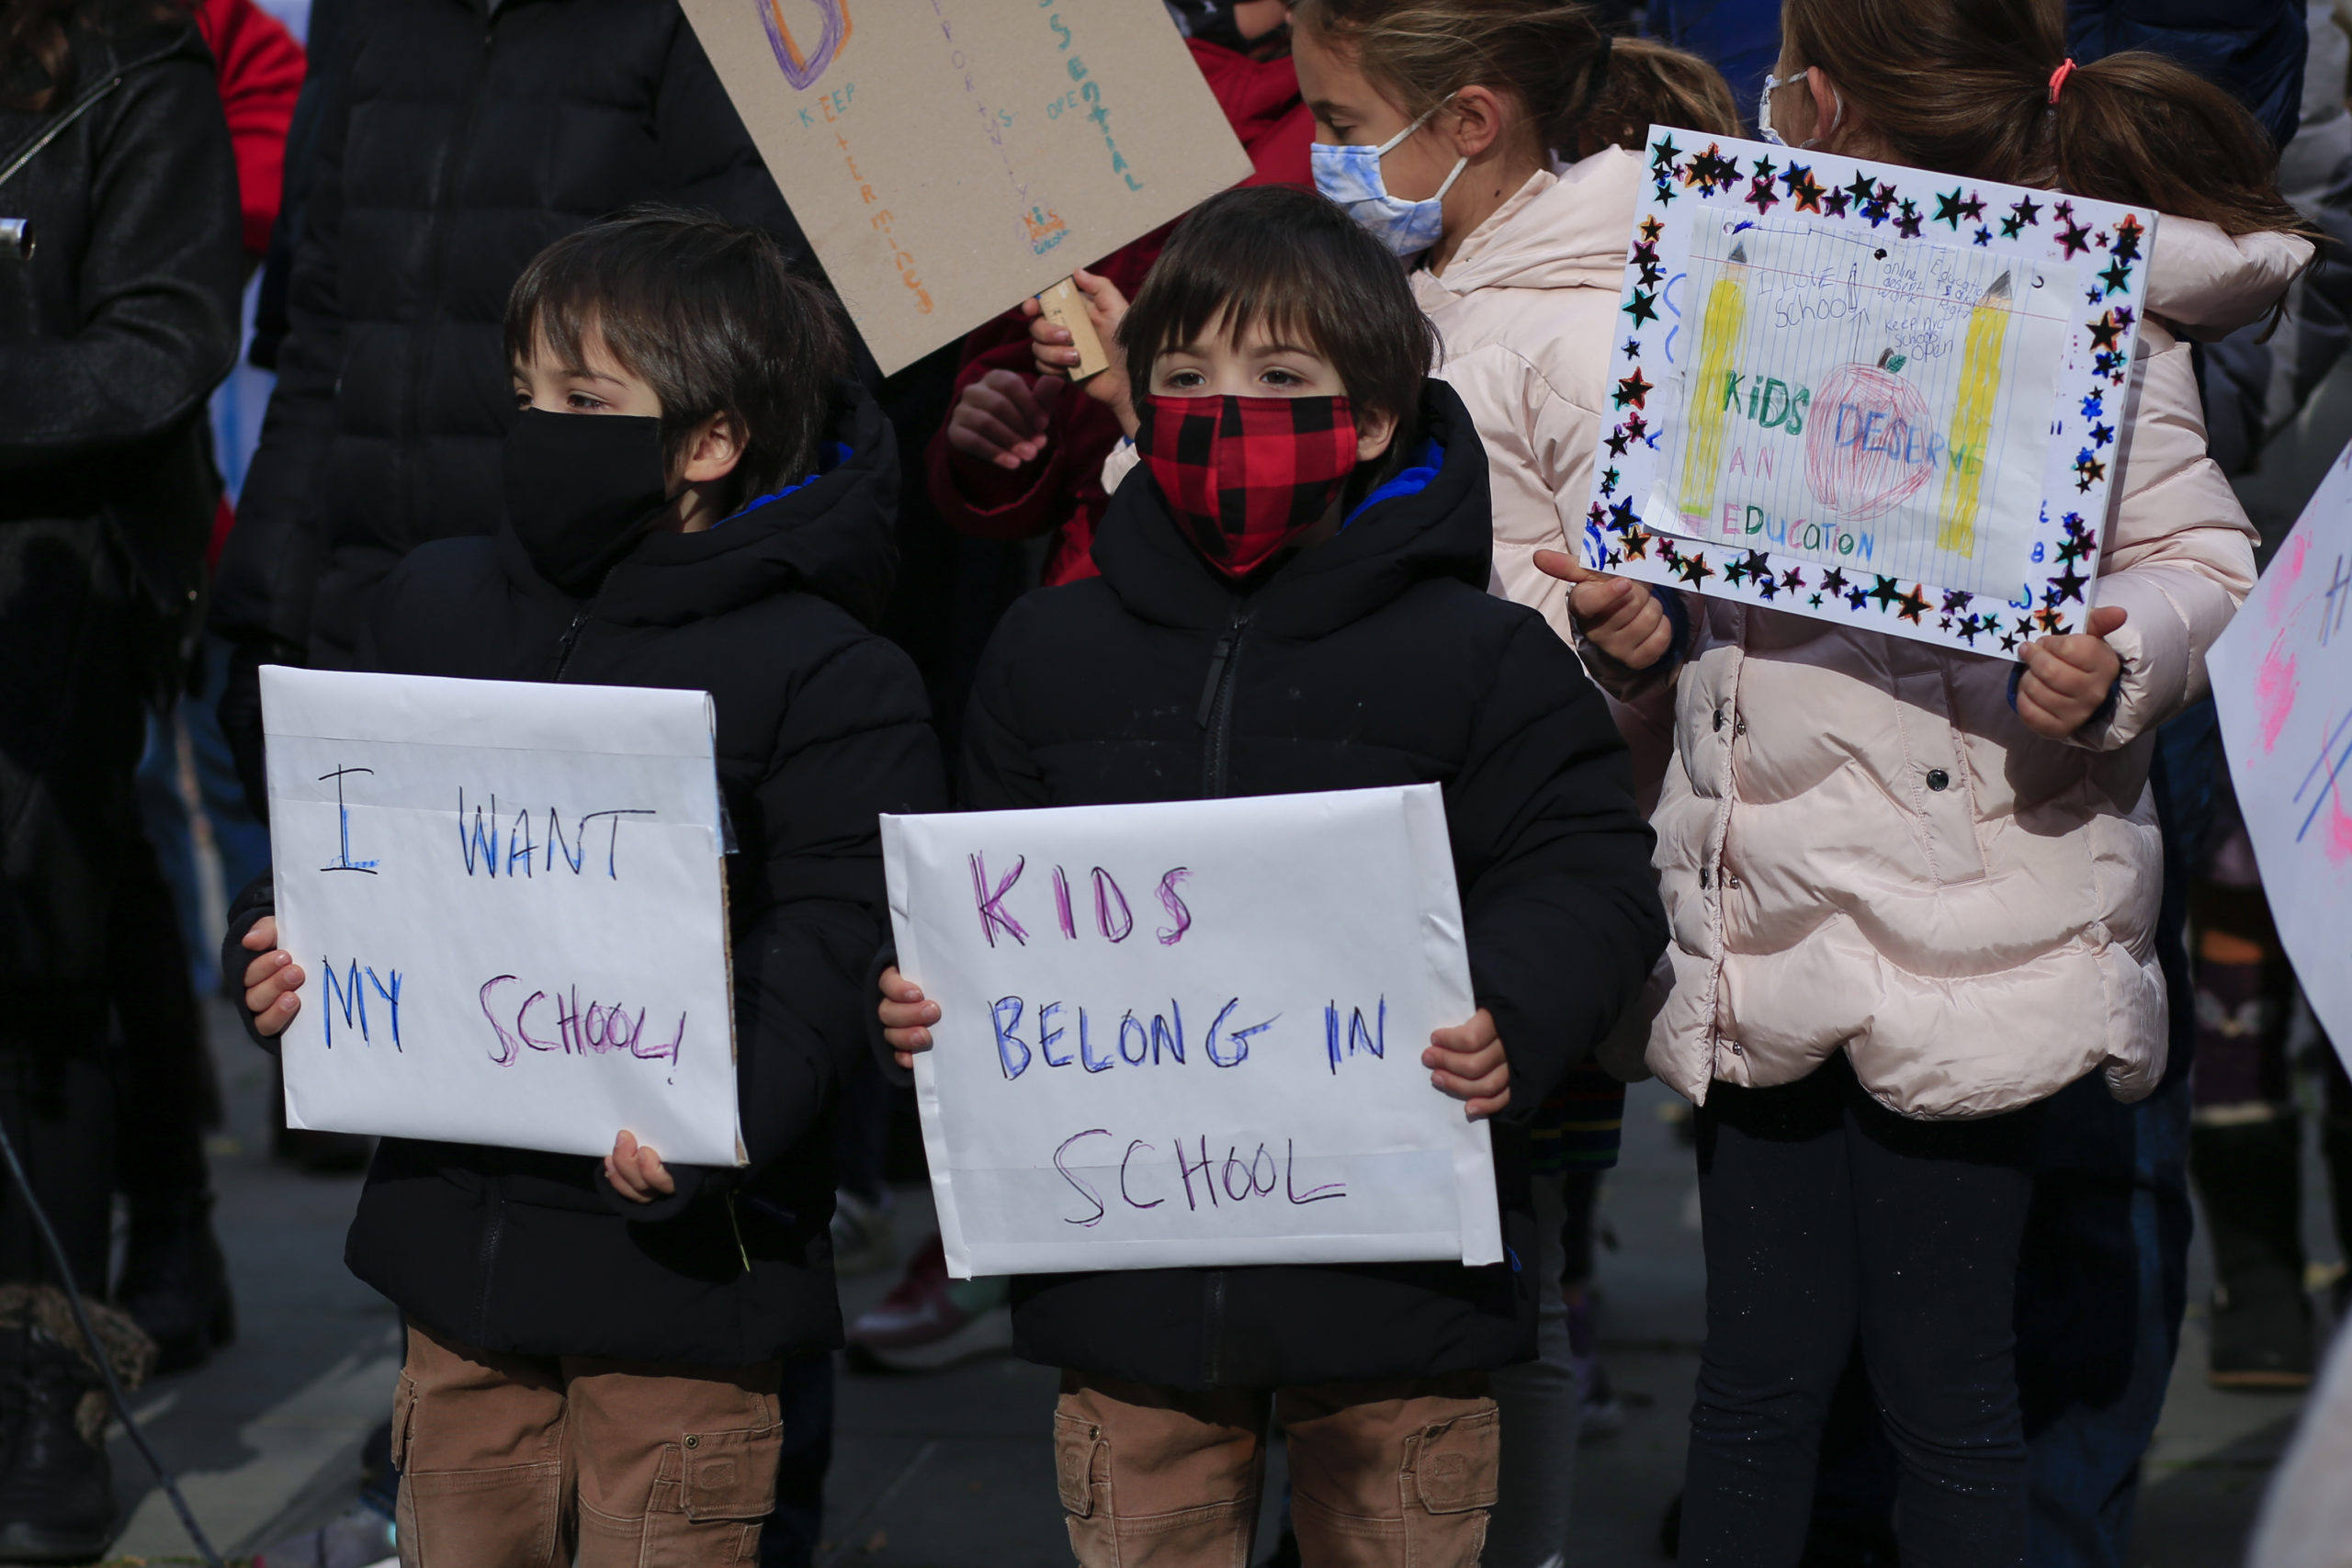 Children take part in a protest demanding that public schools remain open, outside New York's City Hall on November 19, 2020. - US coronavirus deaths passed a quarter of a million people on November 18 as New York announced it would close schools to battle a rise in infections. (Photo by Kena Betancur / AFP) (Photo by KENA BETANCUR/AFP via Getty Images)